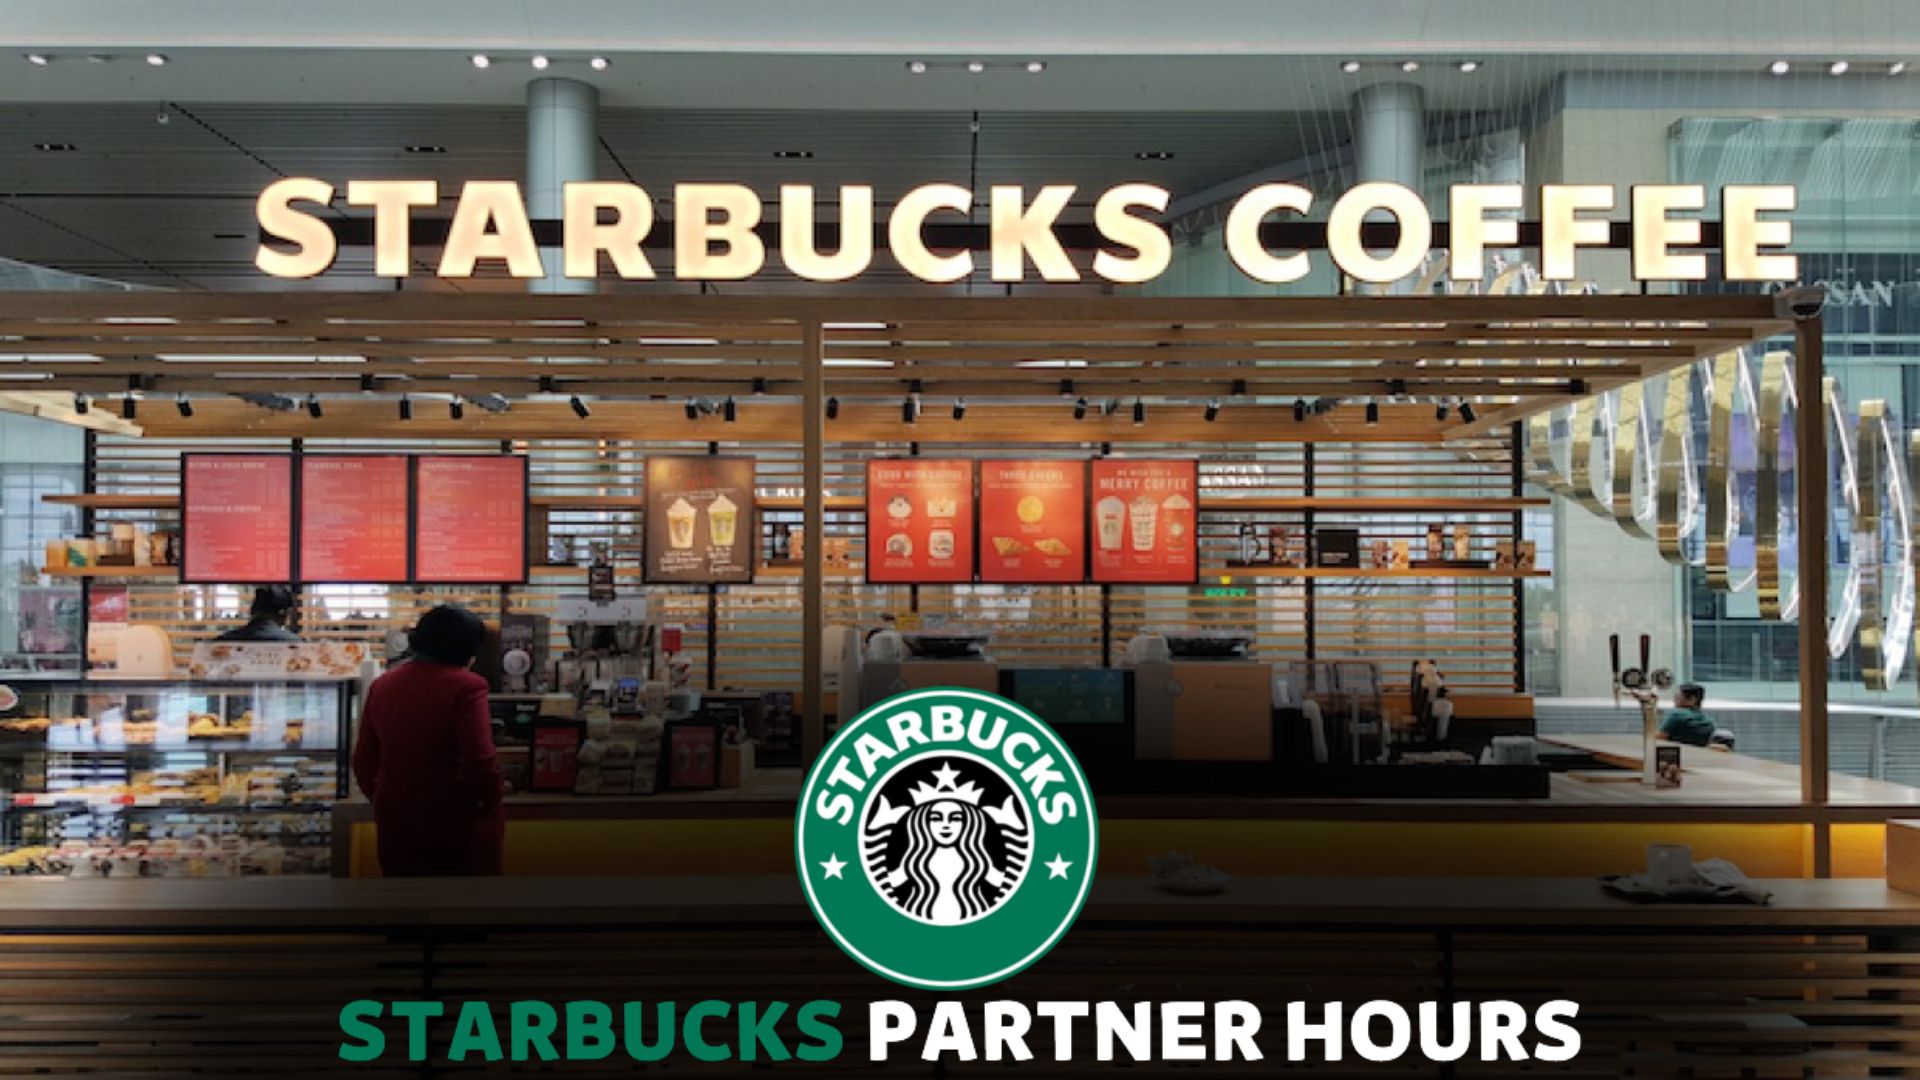 How to Link Partner Card to the Starbucks App